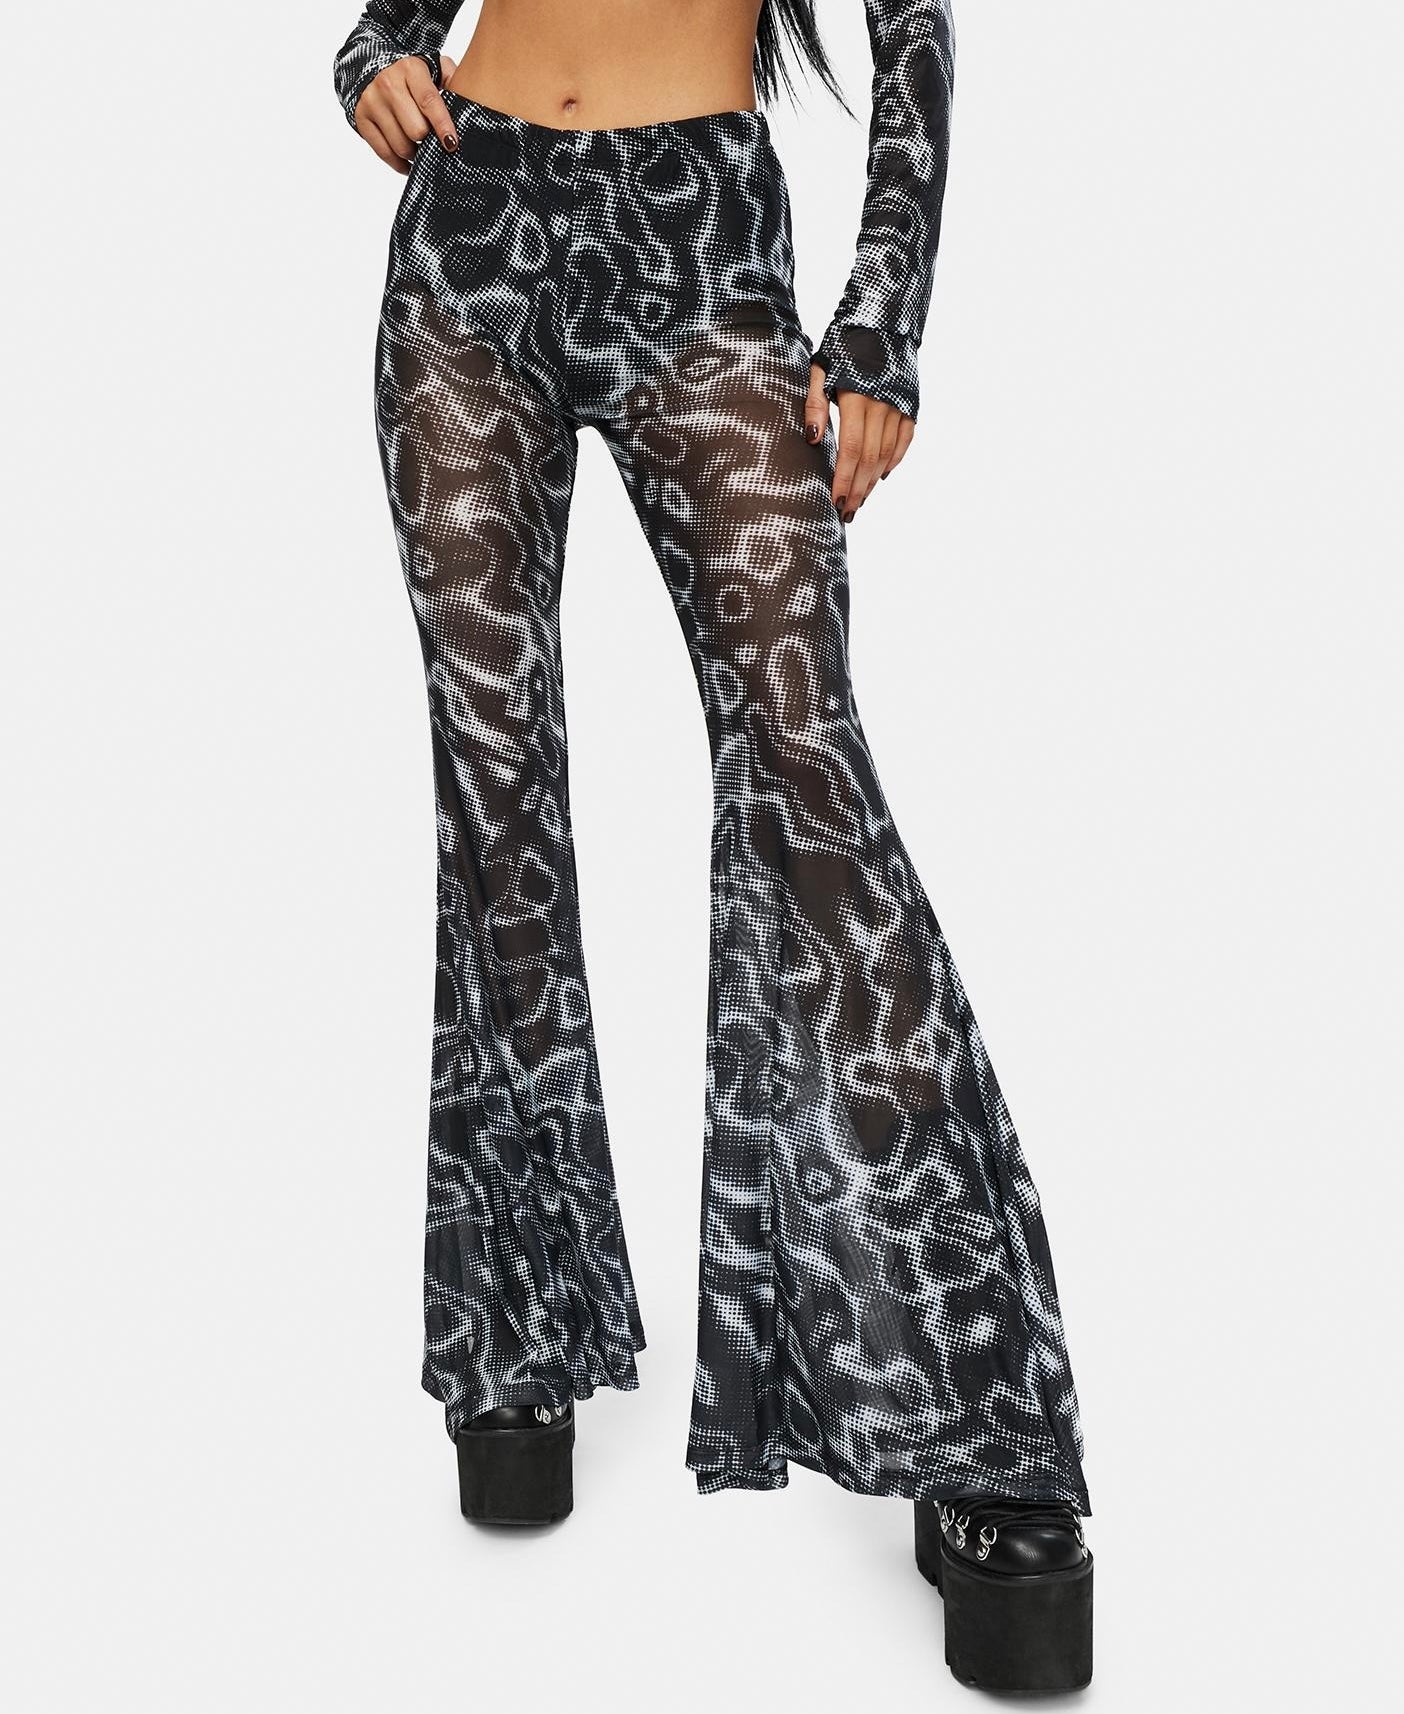 Water Marble Sheer Mesh High Waisted Flares - Black